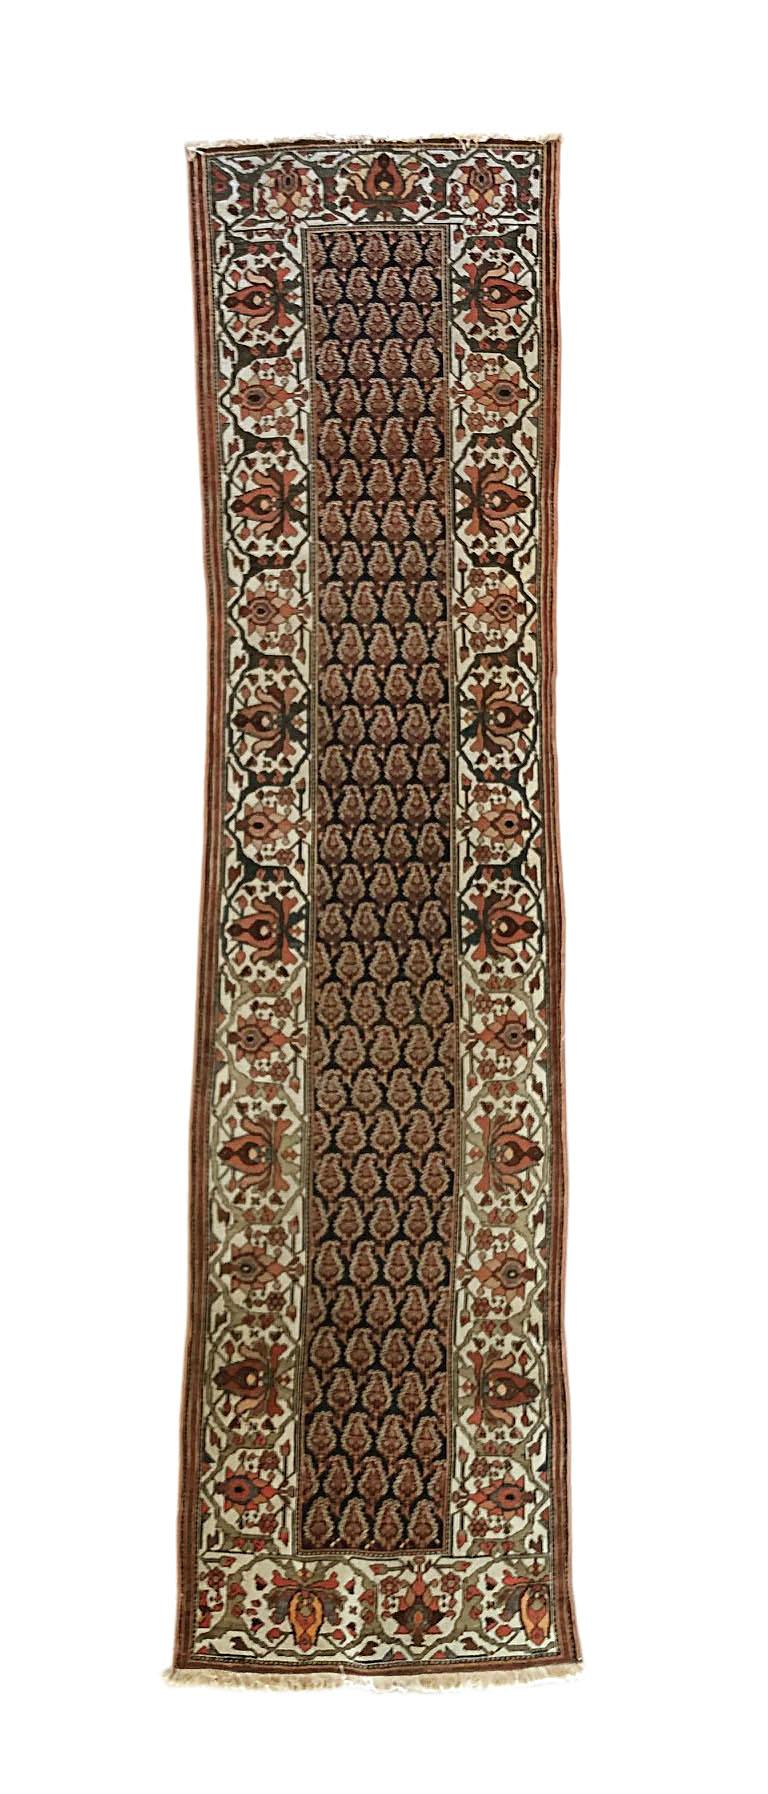 Authentic Persian Hand Knotted Antique Bakhtiari Rug, circa 1880 For Sale 7